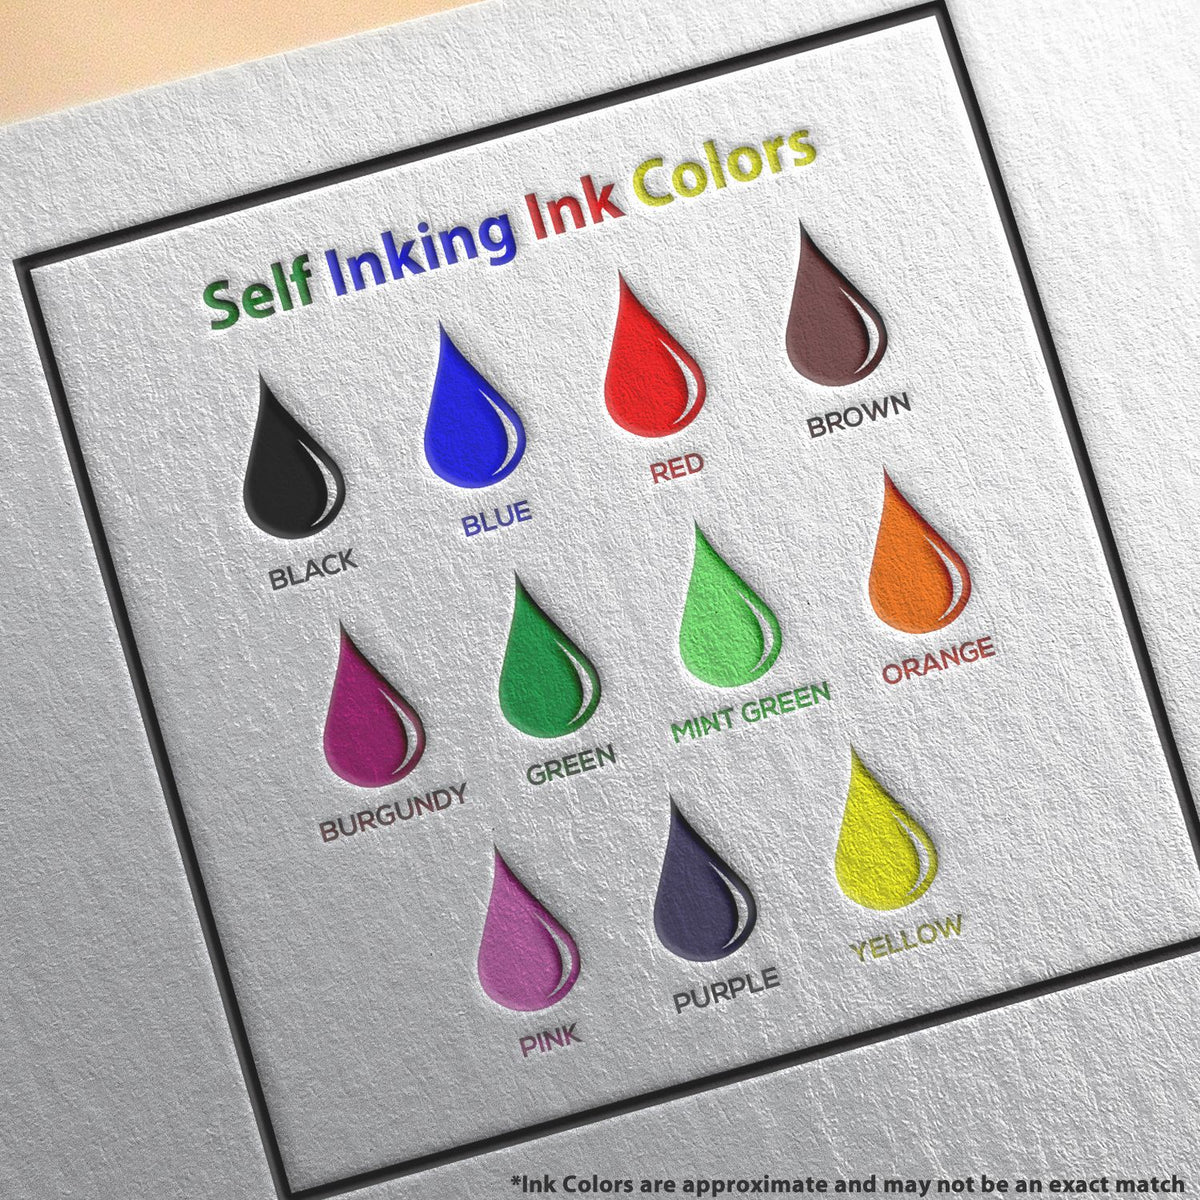 A picture showing the different ink colors or hues available for the Self-Inking New York Landscape Architect Stamp product.